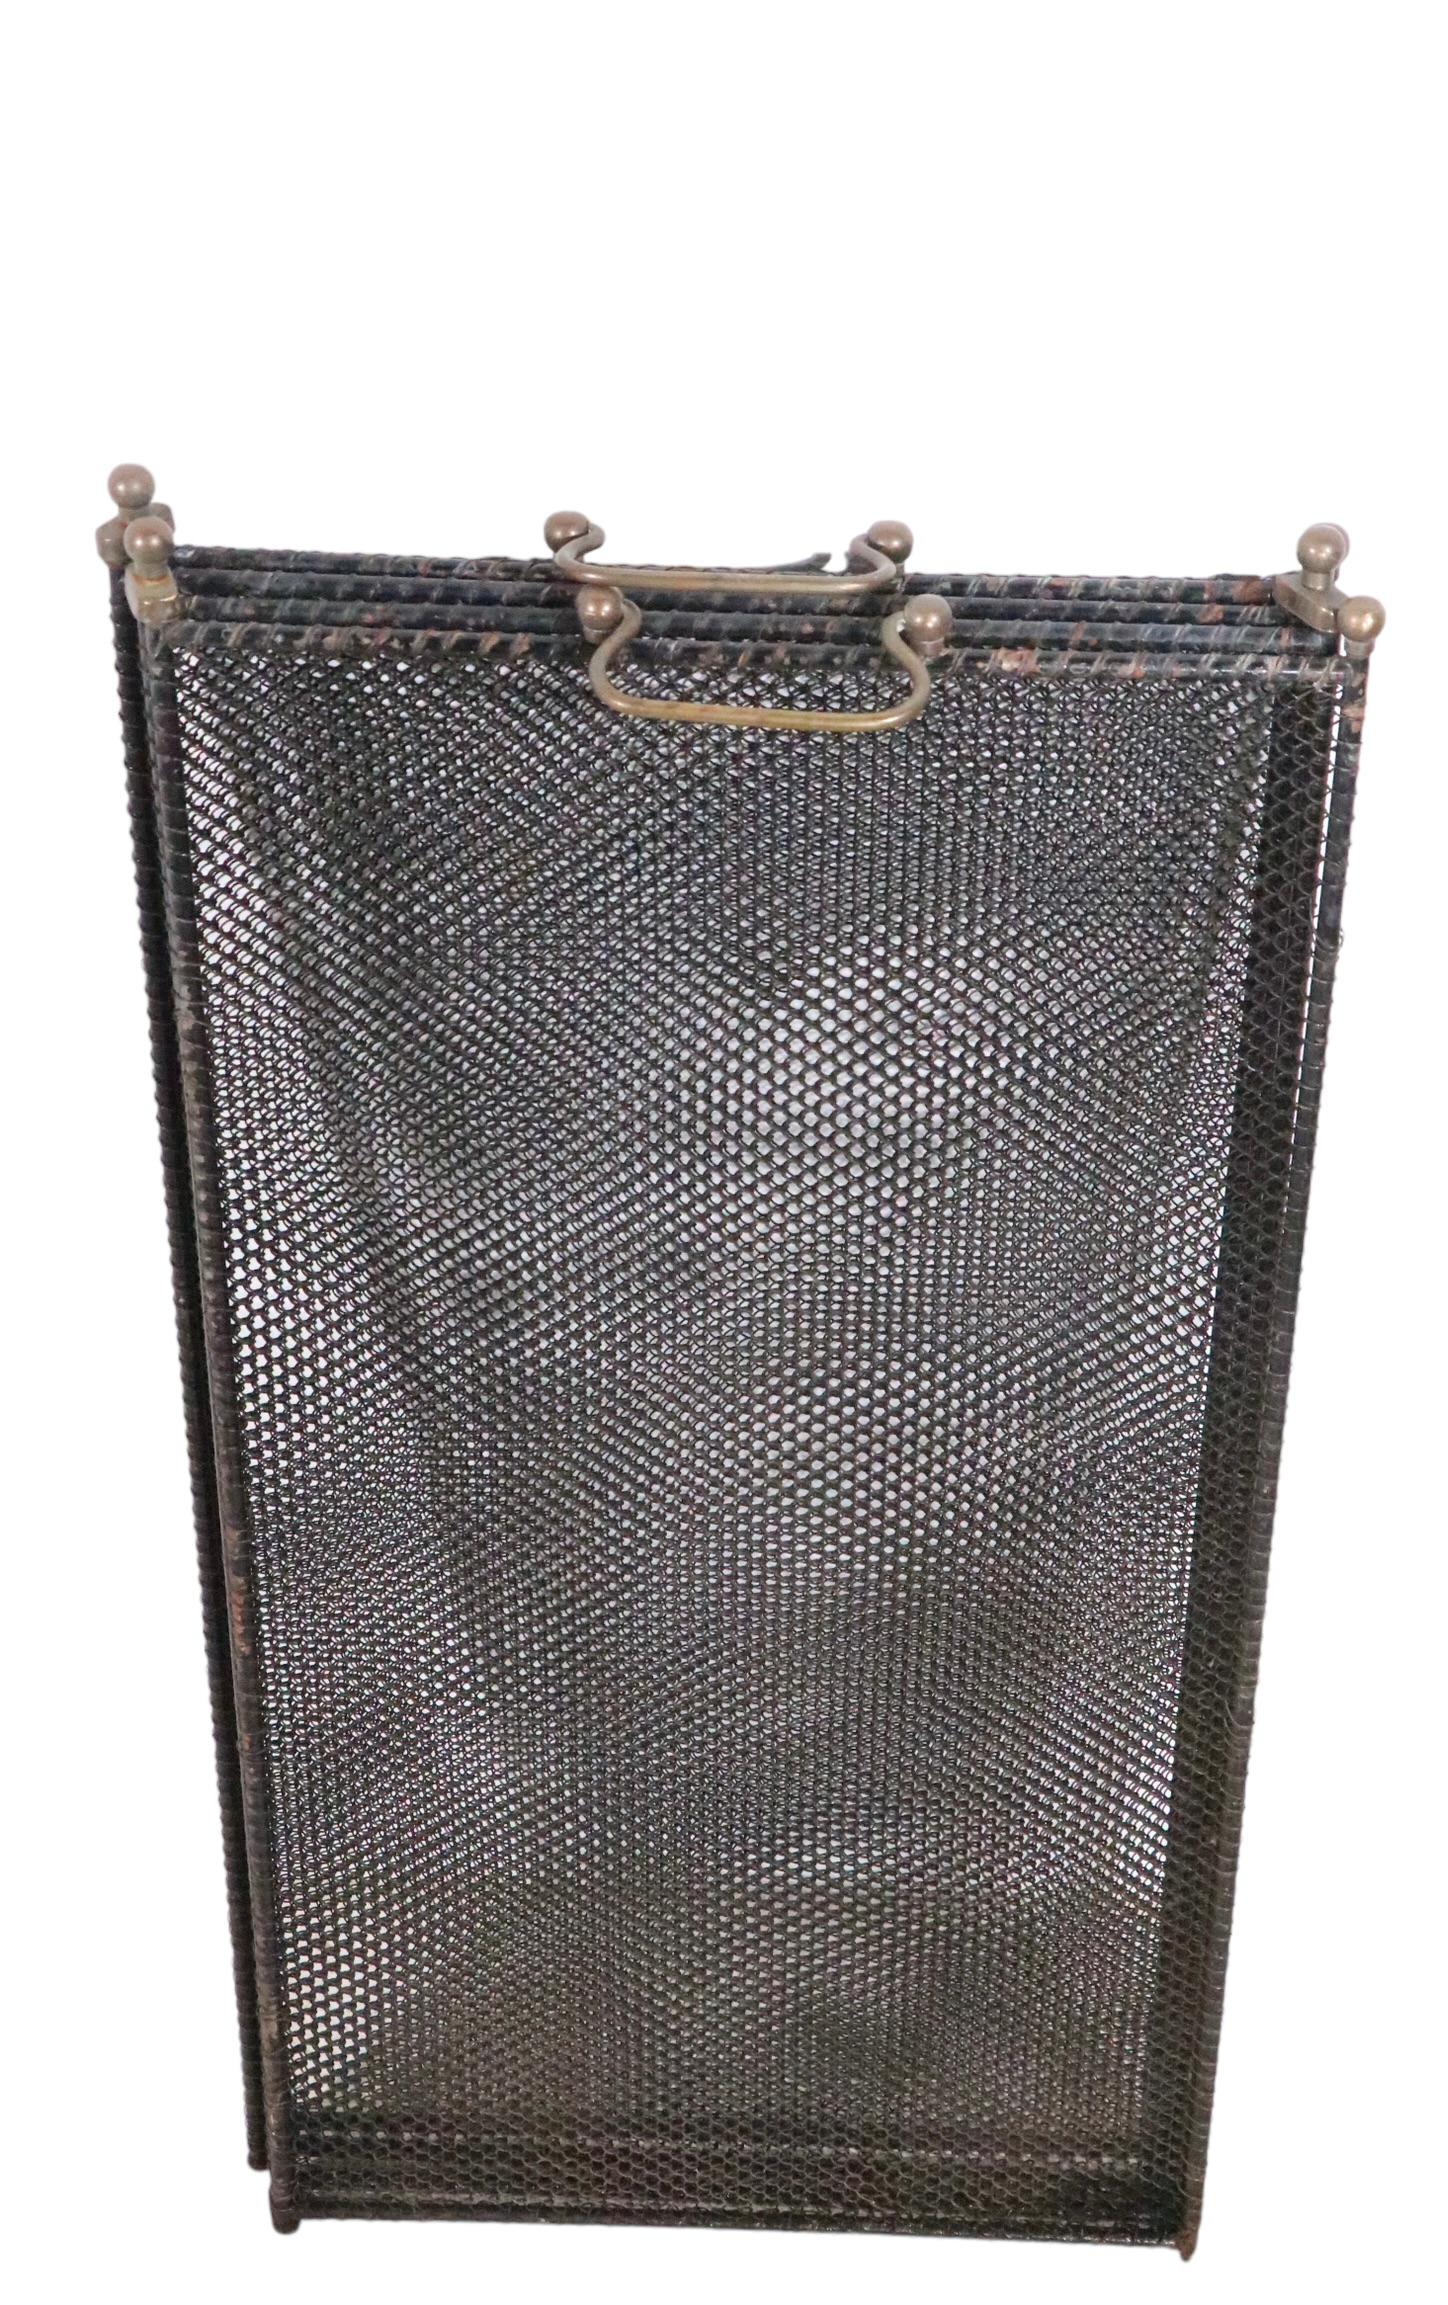 Classic  folding fireplace screen, having four rectangular panels, each 12 W x 20 H inches, ( 25 H inch H including the brass handle ). The total W of the screen is adjustable as it is flexible, up to approx. 49 in W. This spark guard  is in very